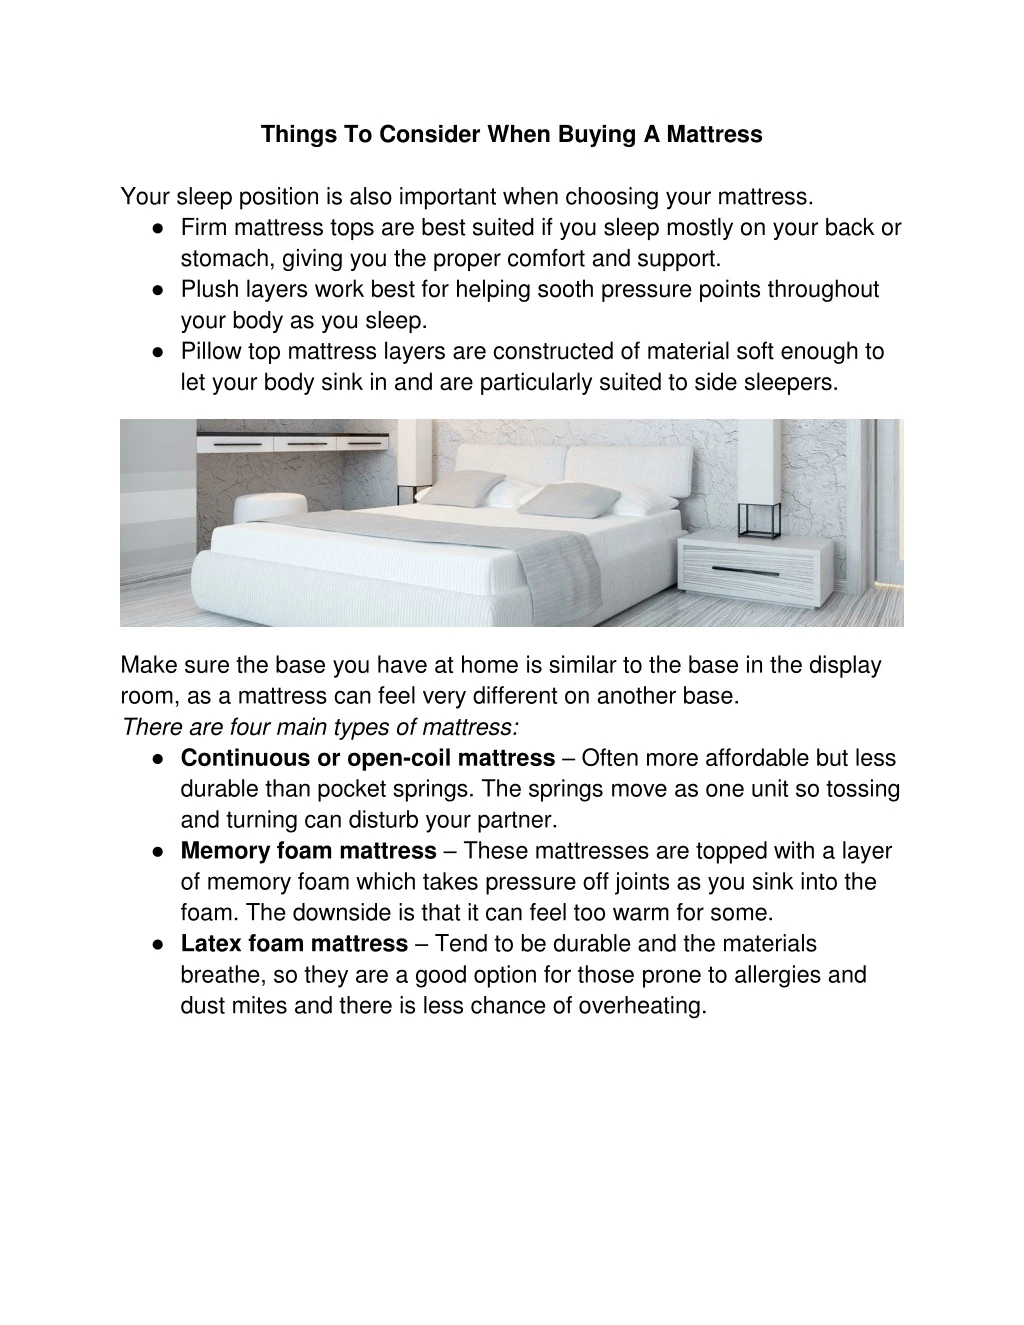 things to consider when buying a mattress